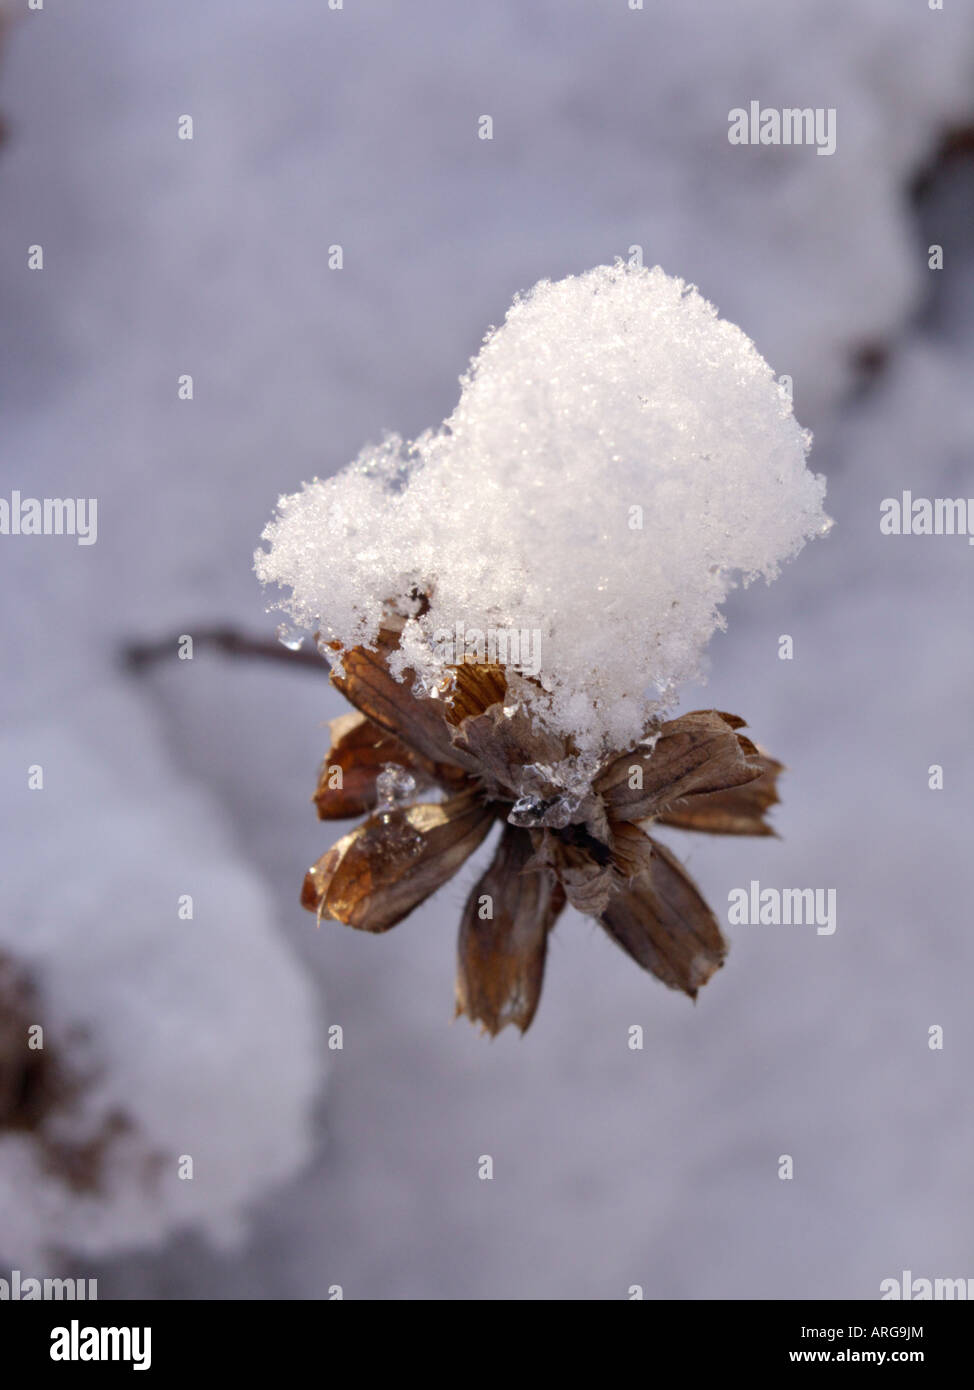 Snow-covered seed head Stock Photo